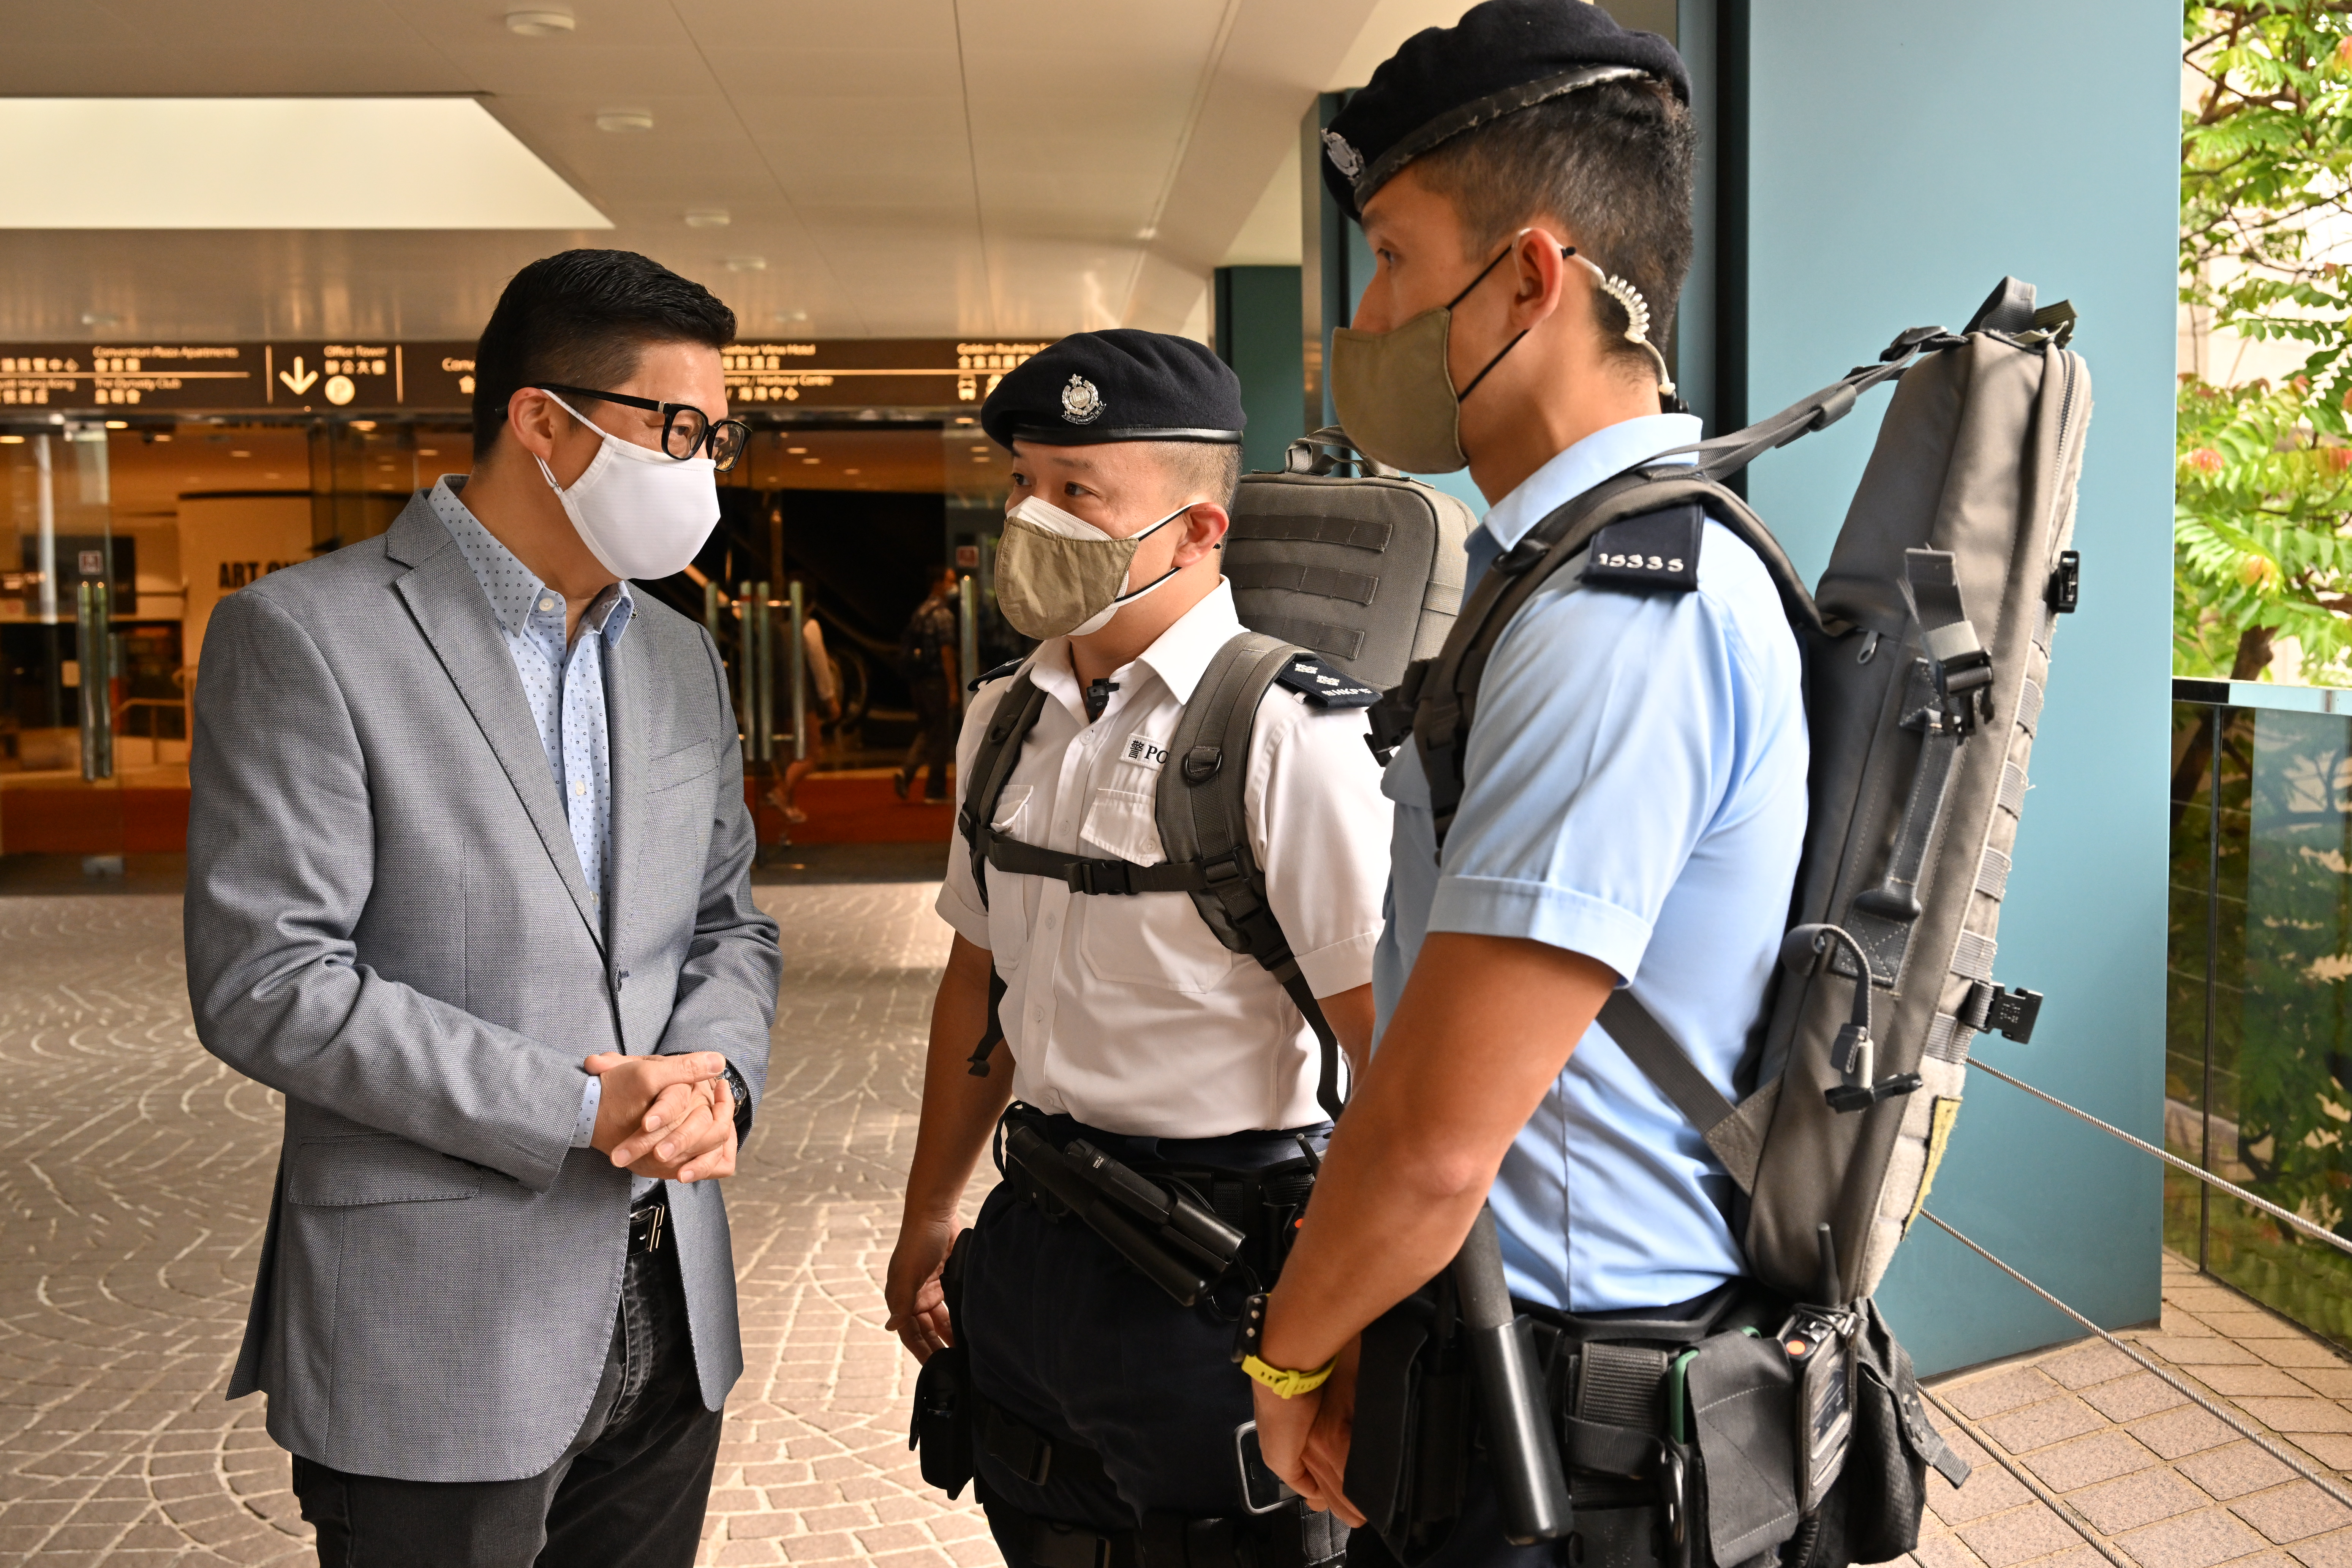 The Secretary for Security, Mr Tang Ping-keung, inspected the security arrangements in the vicinity of the Hong Kong Convention and Exhibition Centre in the morning on May 8 to ensure the 2022 Chief Executive Election be conducted in a safe and orderly manner. Photo shows Mr Tang (left) meeting the personnel of the Counter Terrorism Response Unit of the Police on duty nearby and giving them words of encouragement.